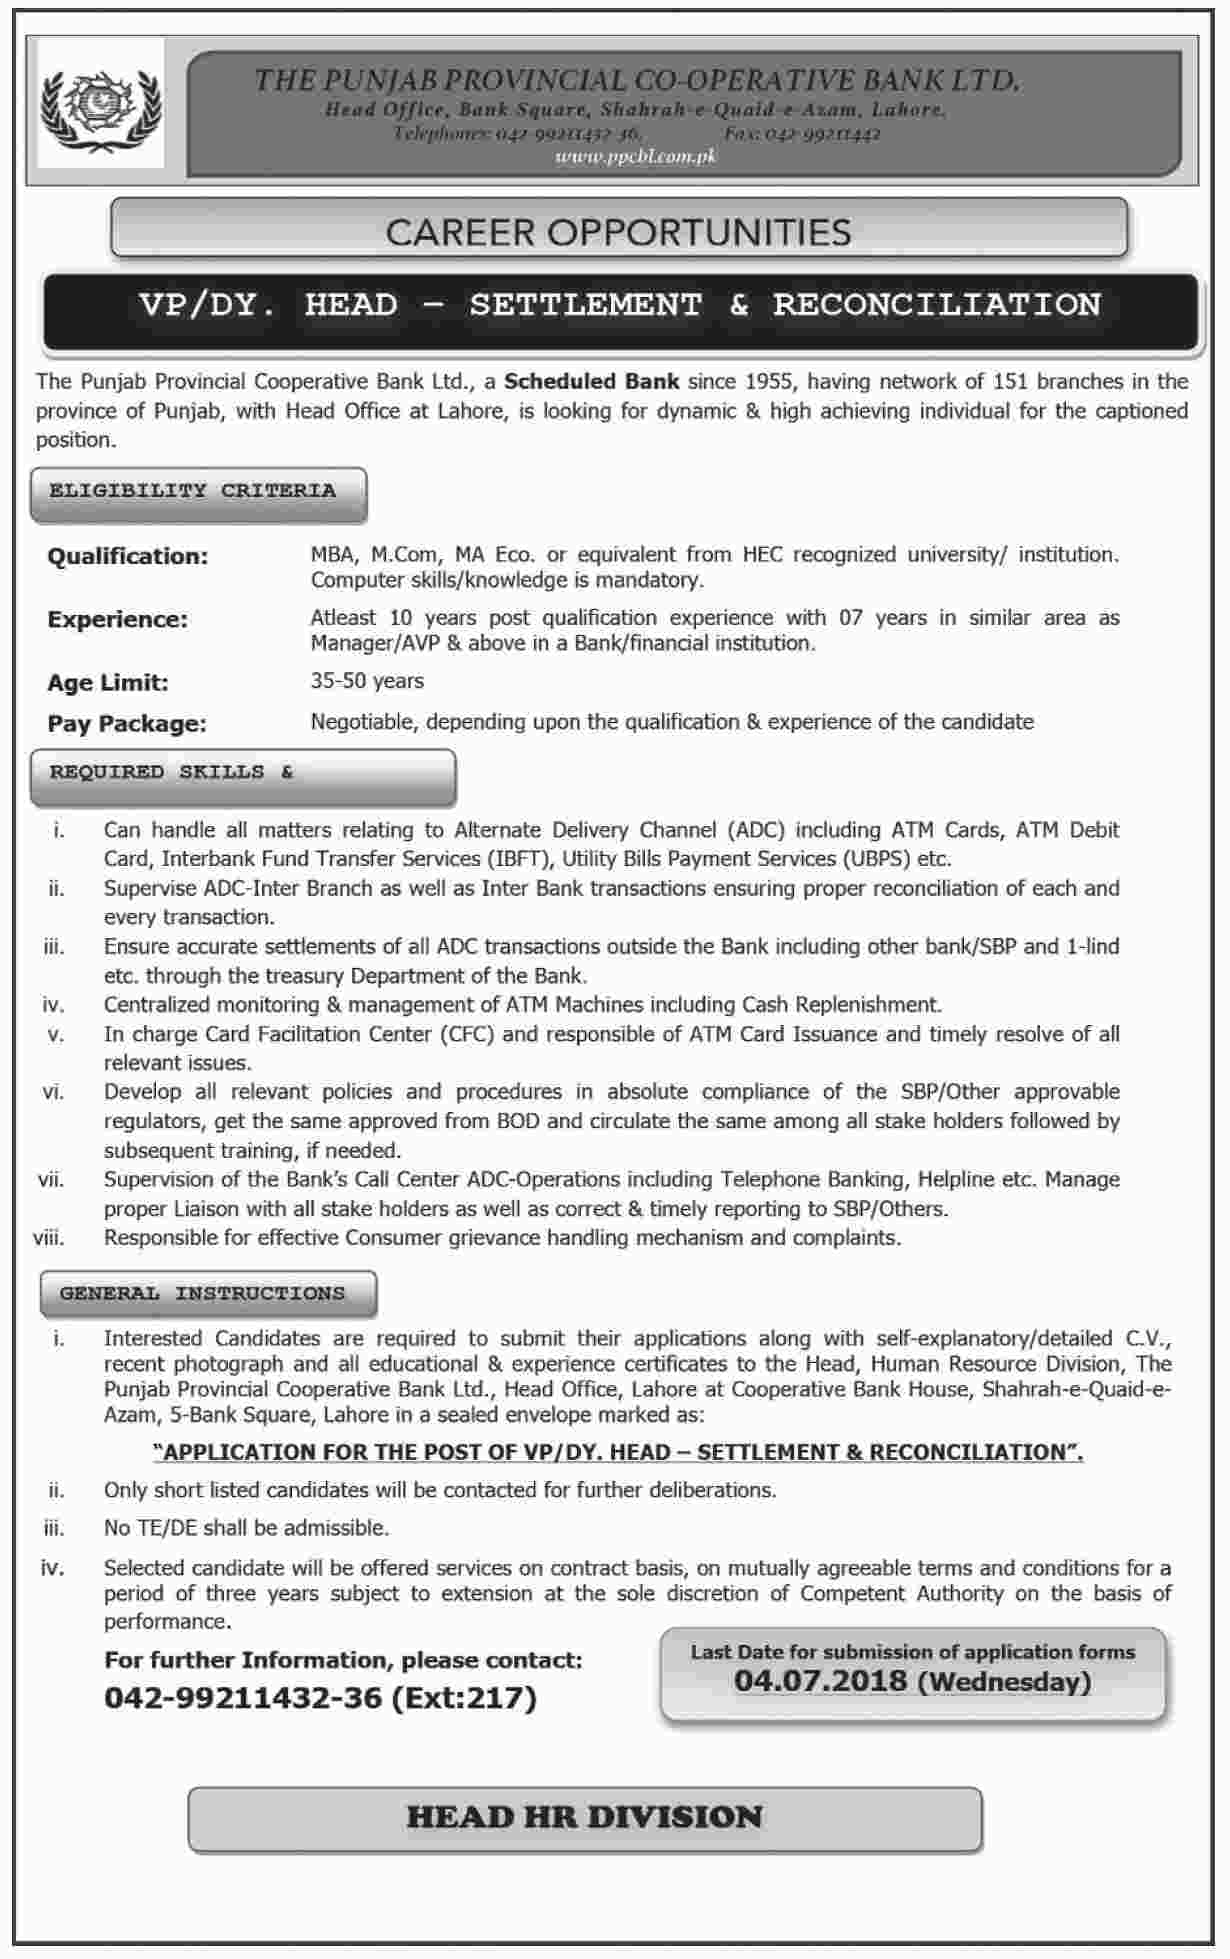 Jobs in The Punjab Provincial Cooperative Bank Limited 10 June 2018